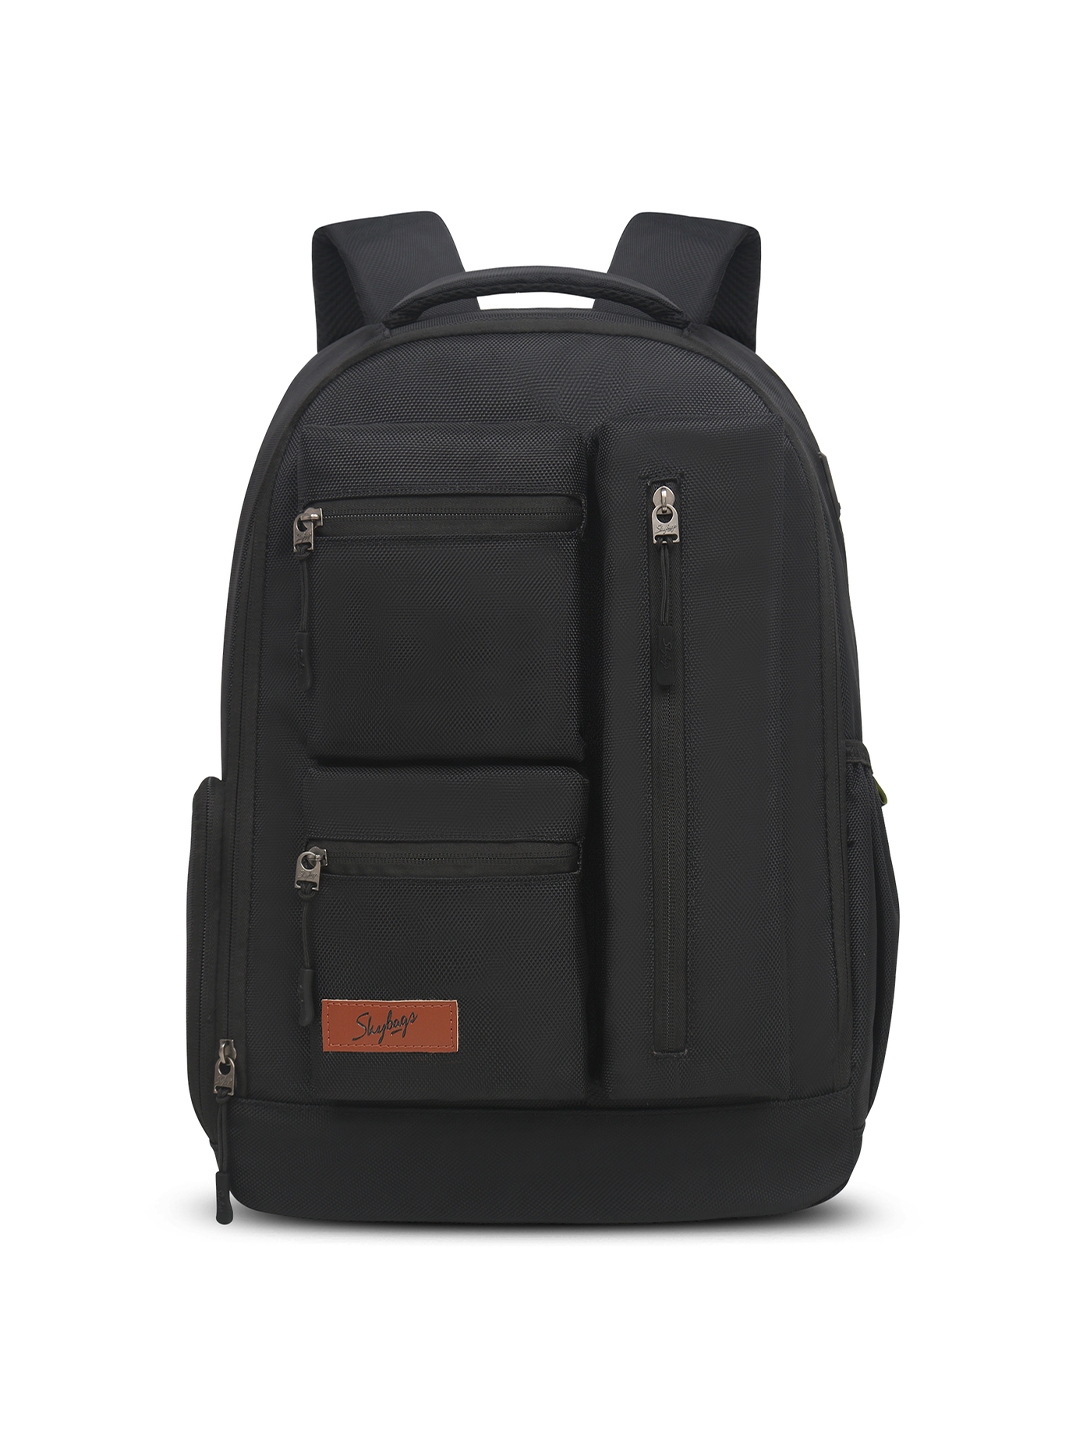 Buy Skybags Unisex Nexus Laptop Backpack With USB Charging Port ...